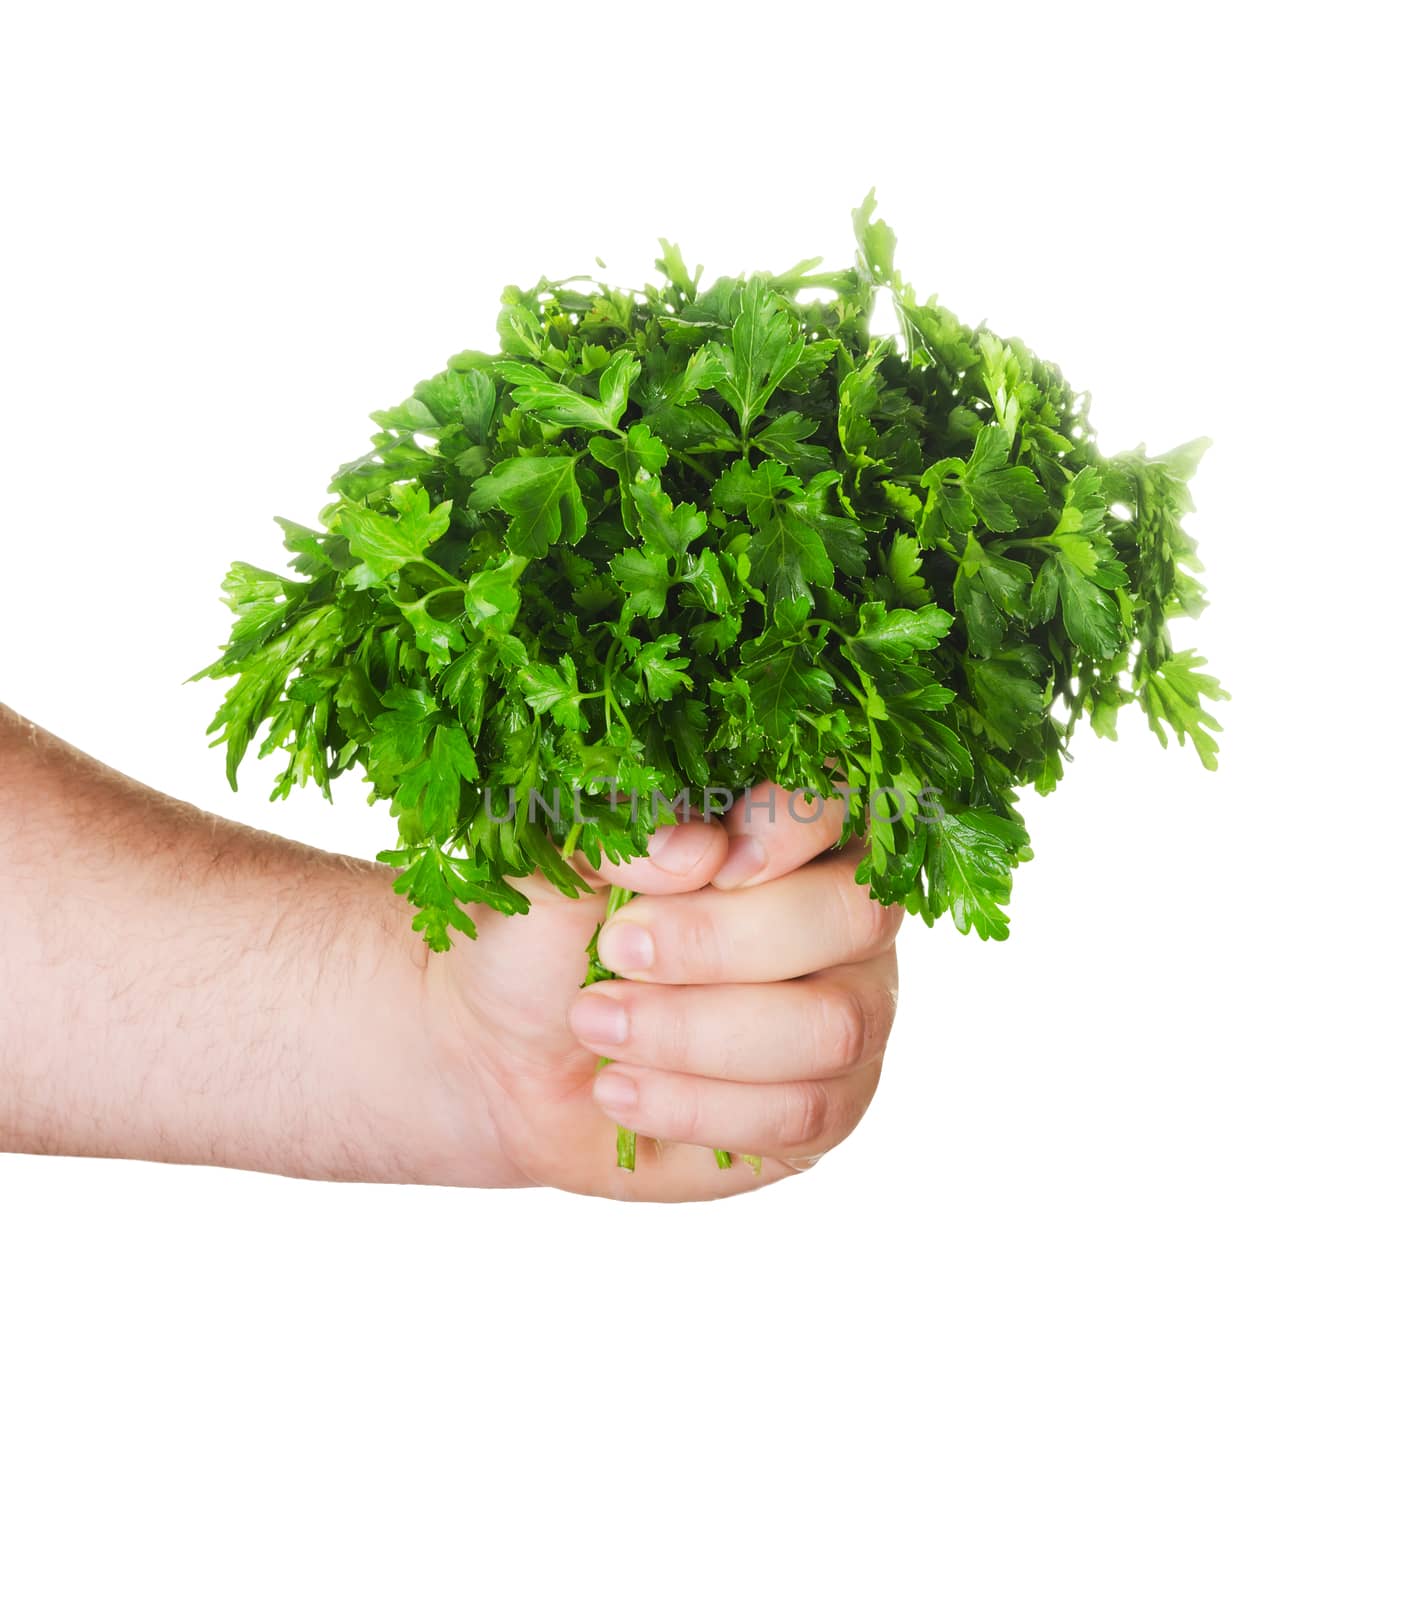 man's hand holding a bunch of parsley, fresh herbs, isolated on white background, healthy eating, vegetarian, raw food concept